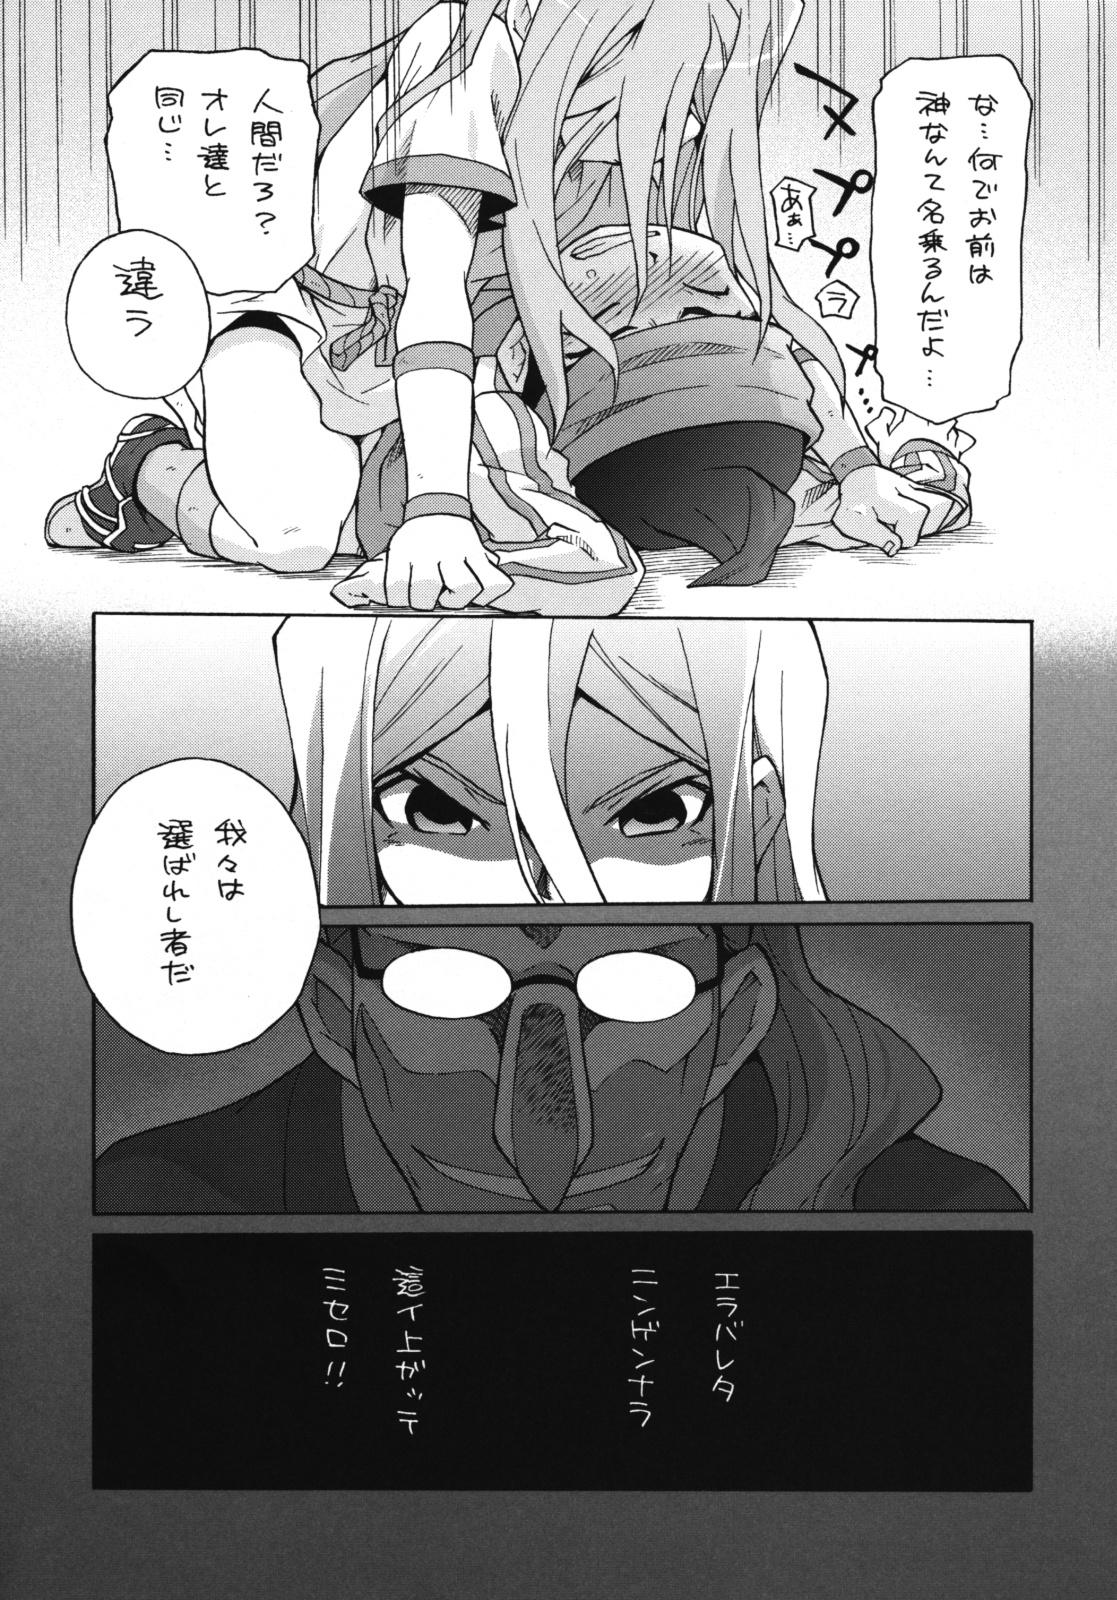 Screaming Terminus - Inazuma eleven Cosplay - Page 11